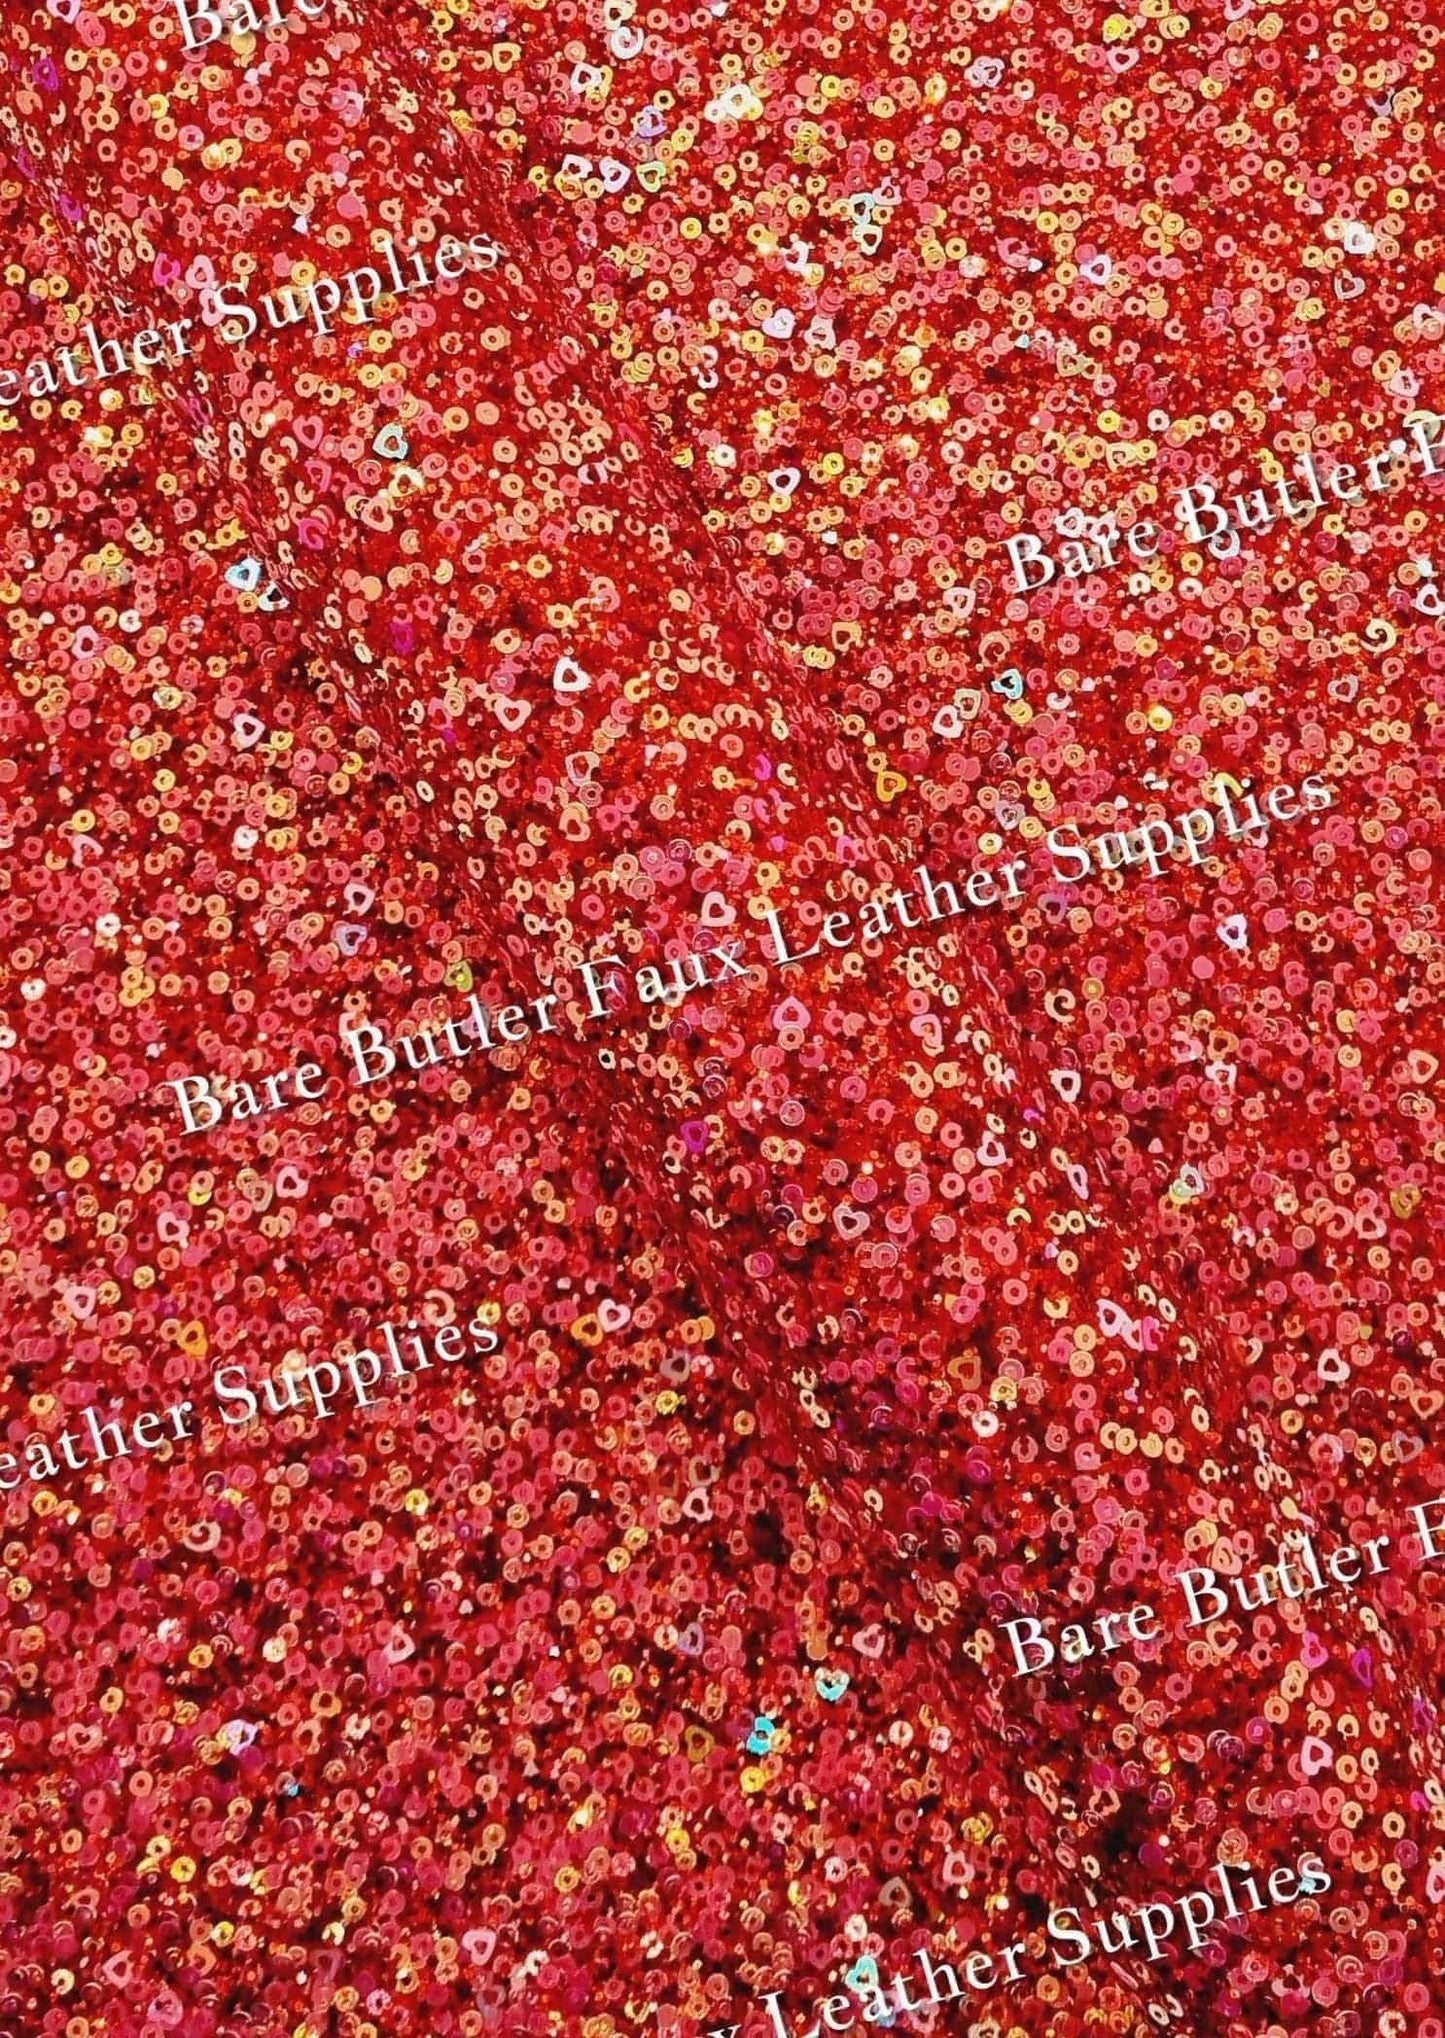 Chunky Glitter Sequin Mix Red - chunky, Faux, Faux Leather, Glitter, Leather, leatherette, Sequin - Bare Butler Faux Leather Supplies 